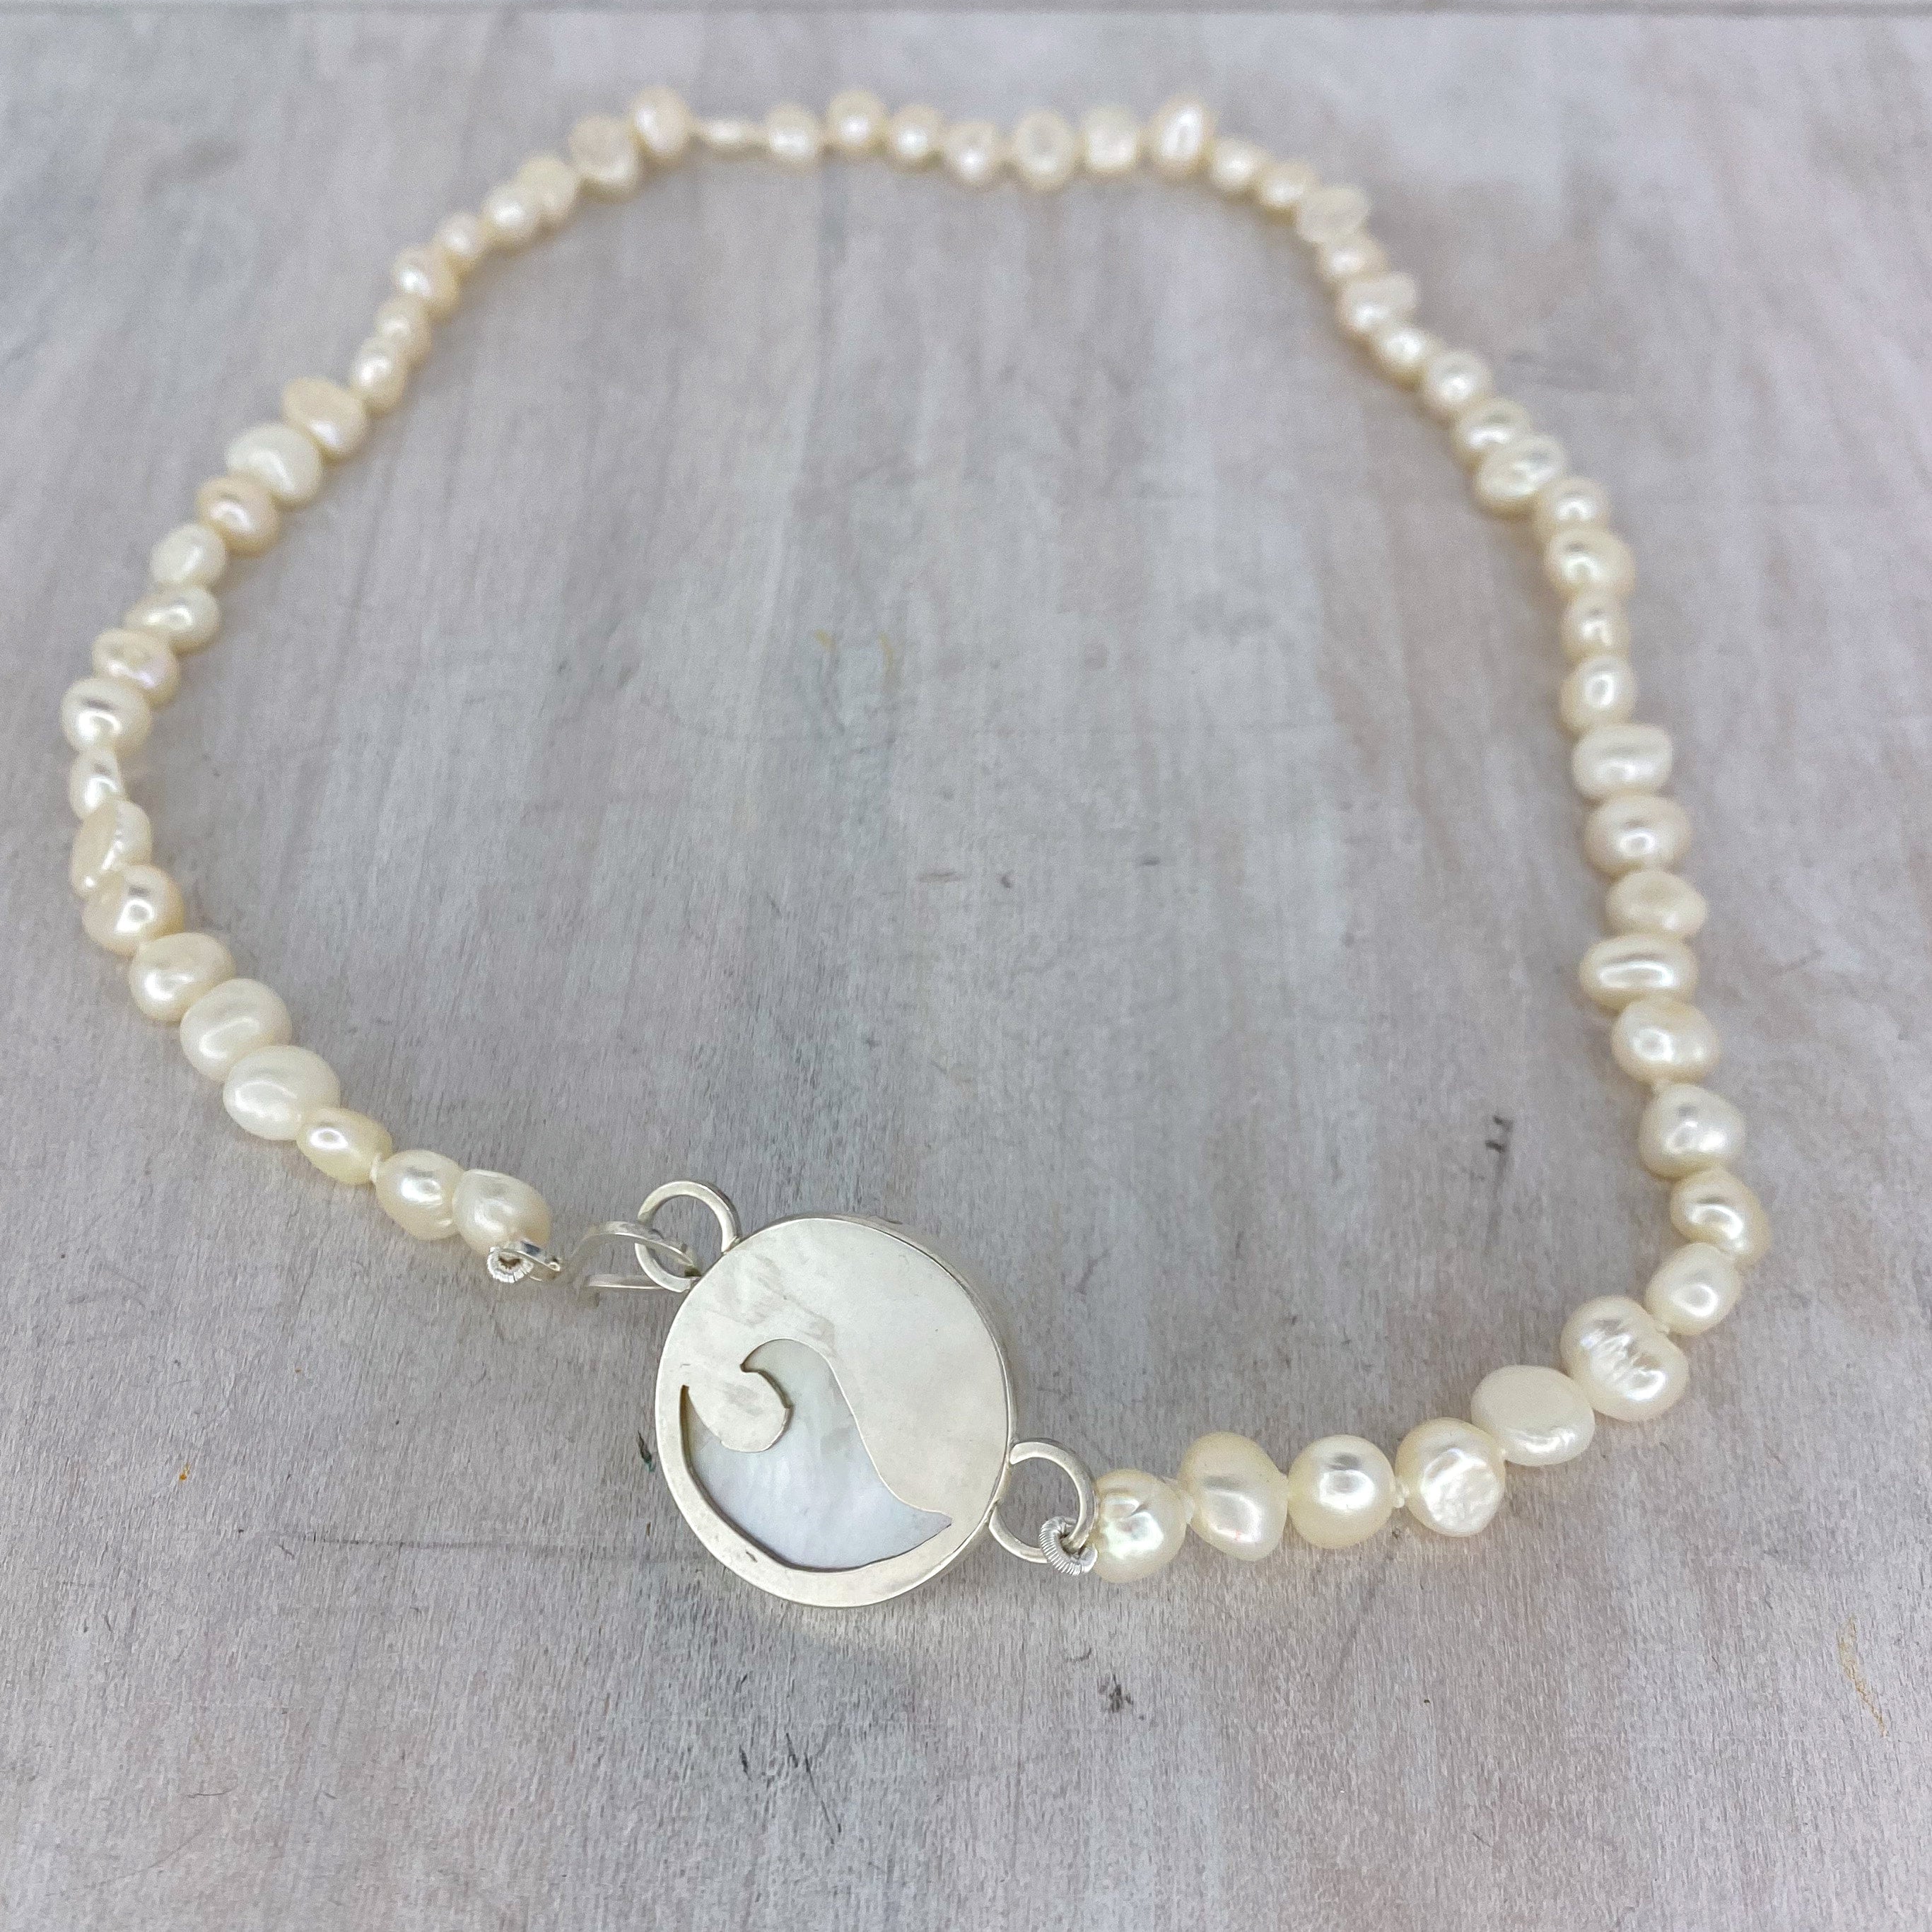 Cultured Mabe Pearl and Leather Cord Pendant Necklace - White Orb – GlobeIn